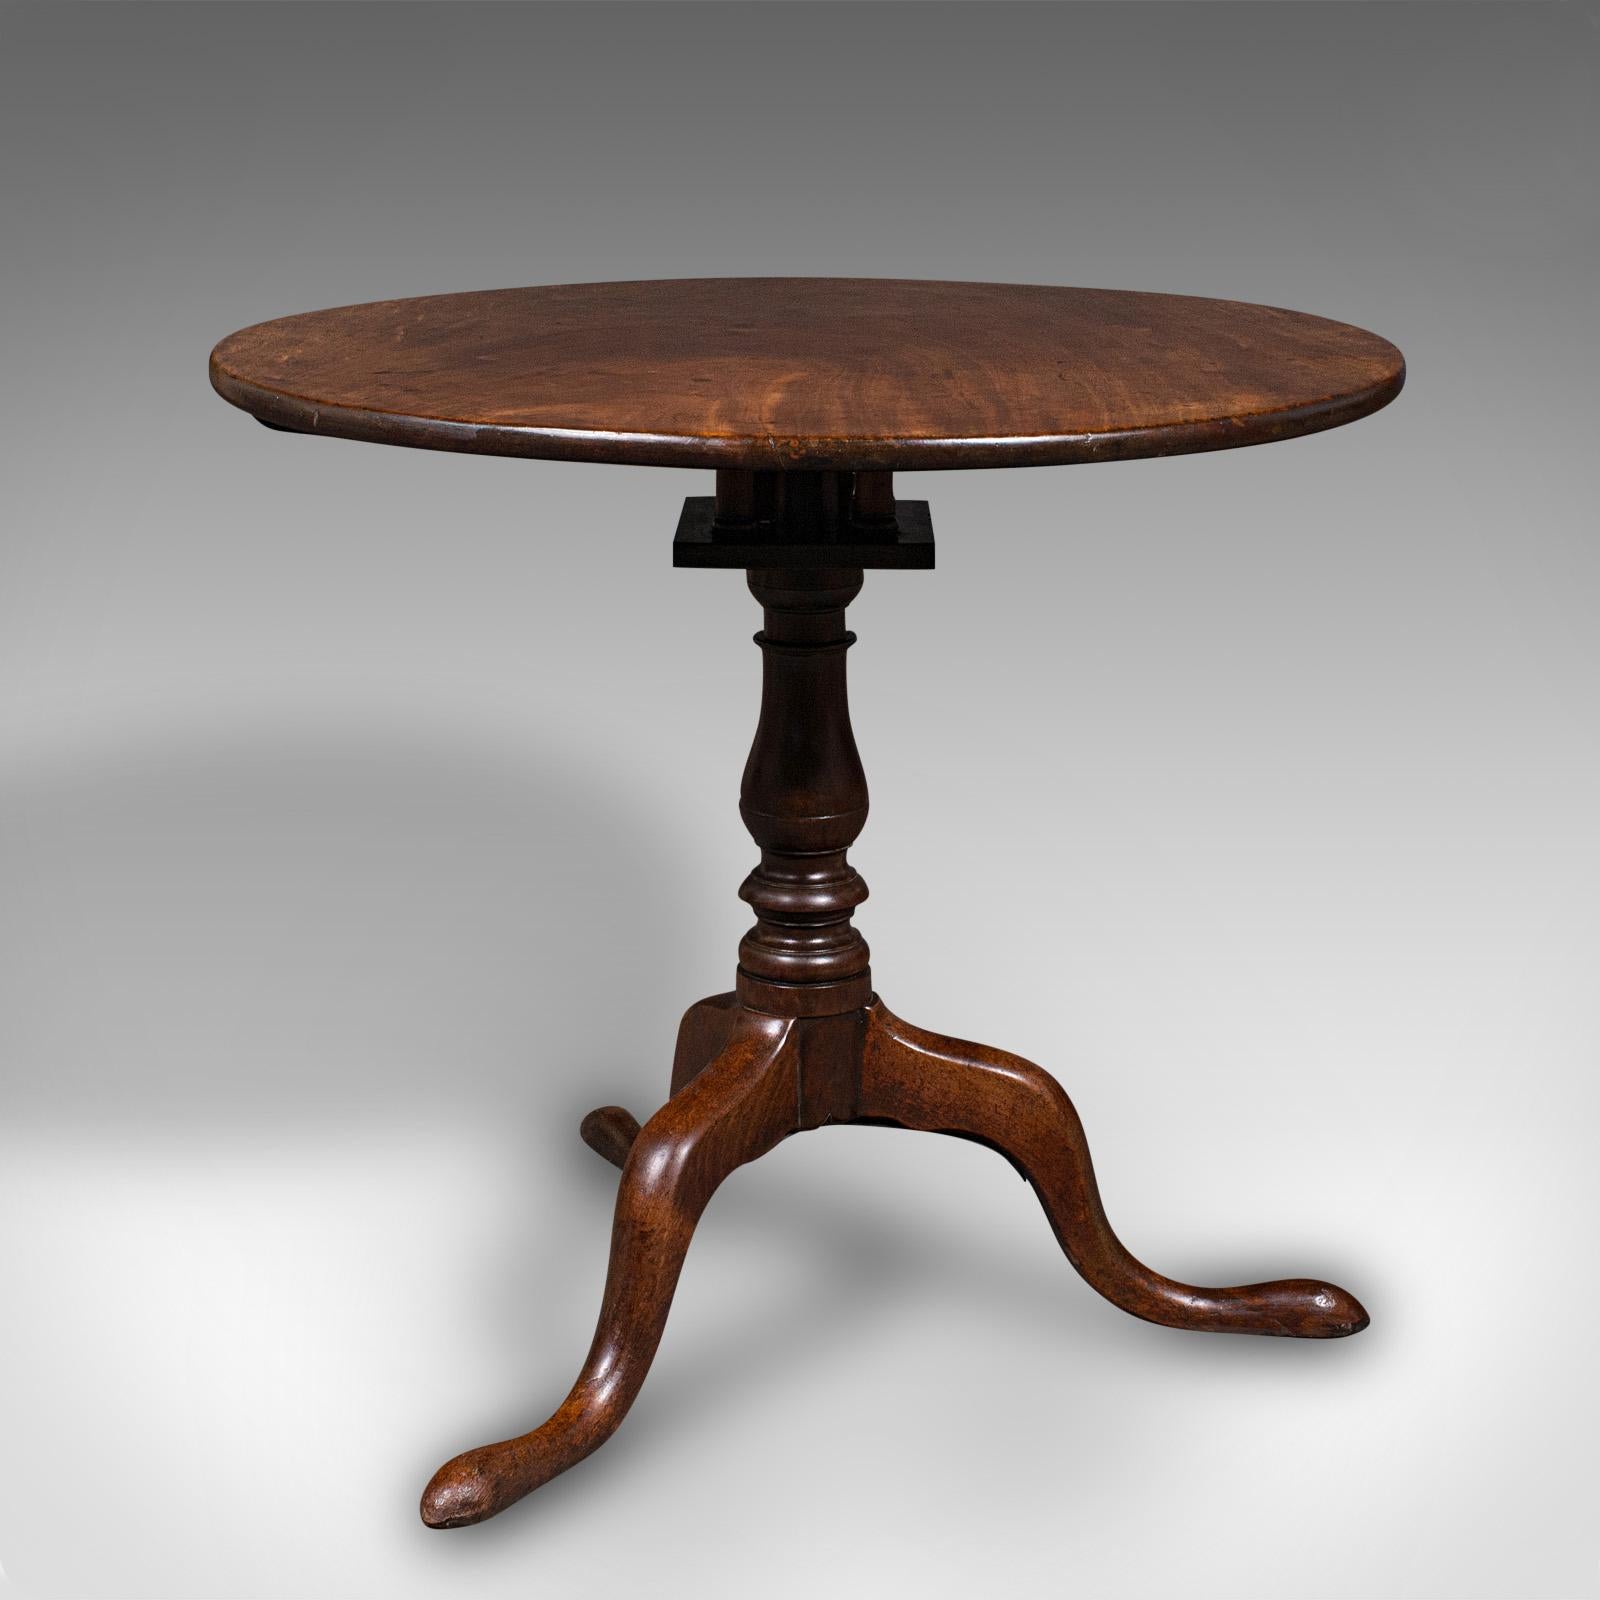 Antique Occasional Table, English, Tilt Top, Lamp, Afternoon Tea, Georgian, 1800 In Good Condition For Sale In Hele, Devon, GB